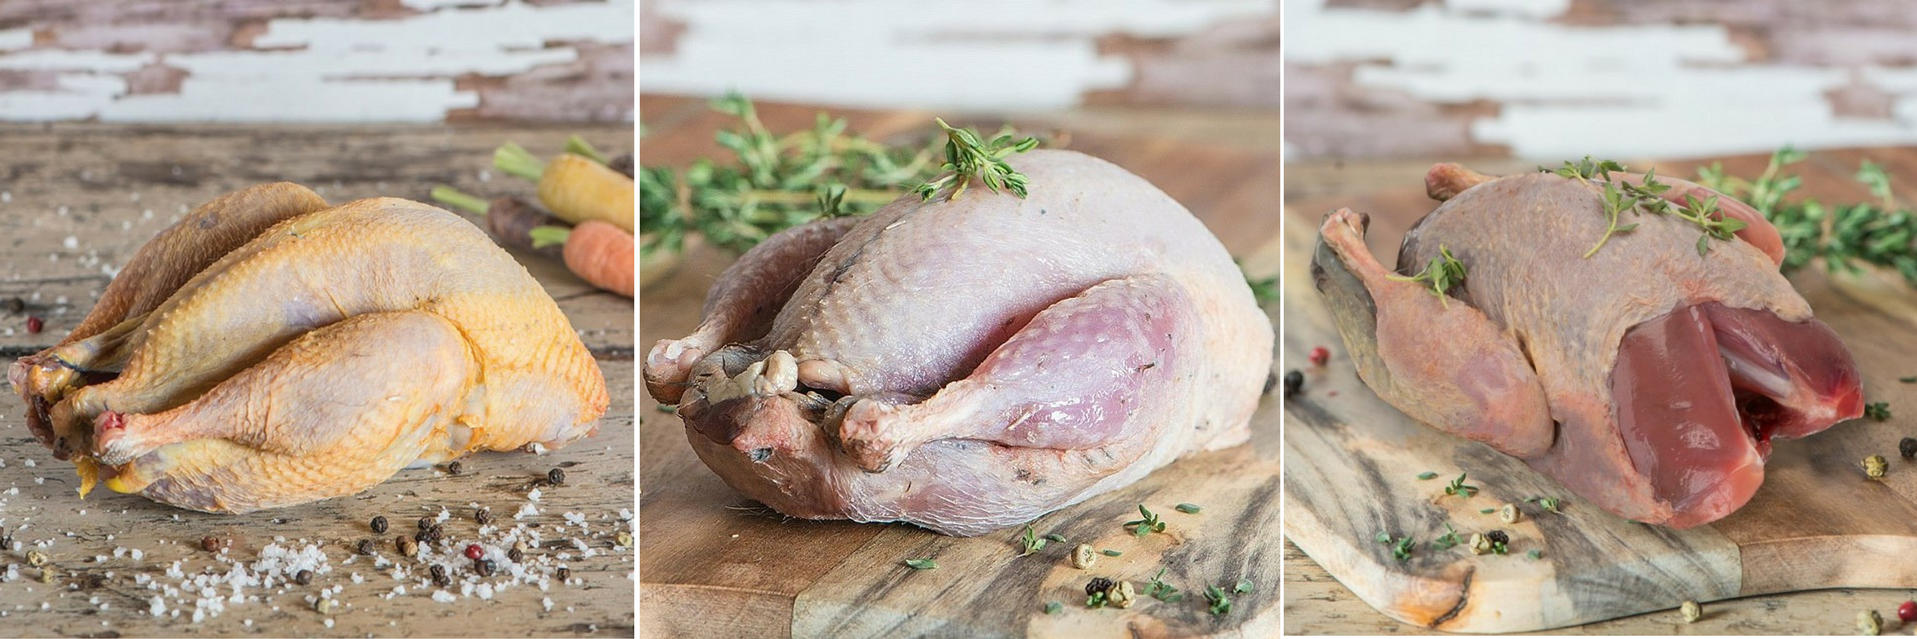 House of Bruar food hall butchery game birds partridge, grouse and pheasant